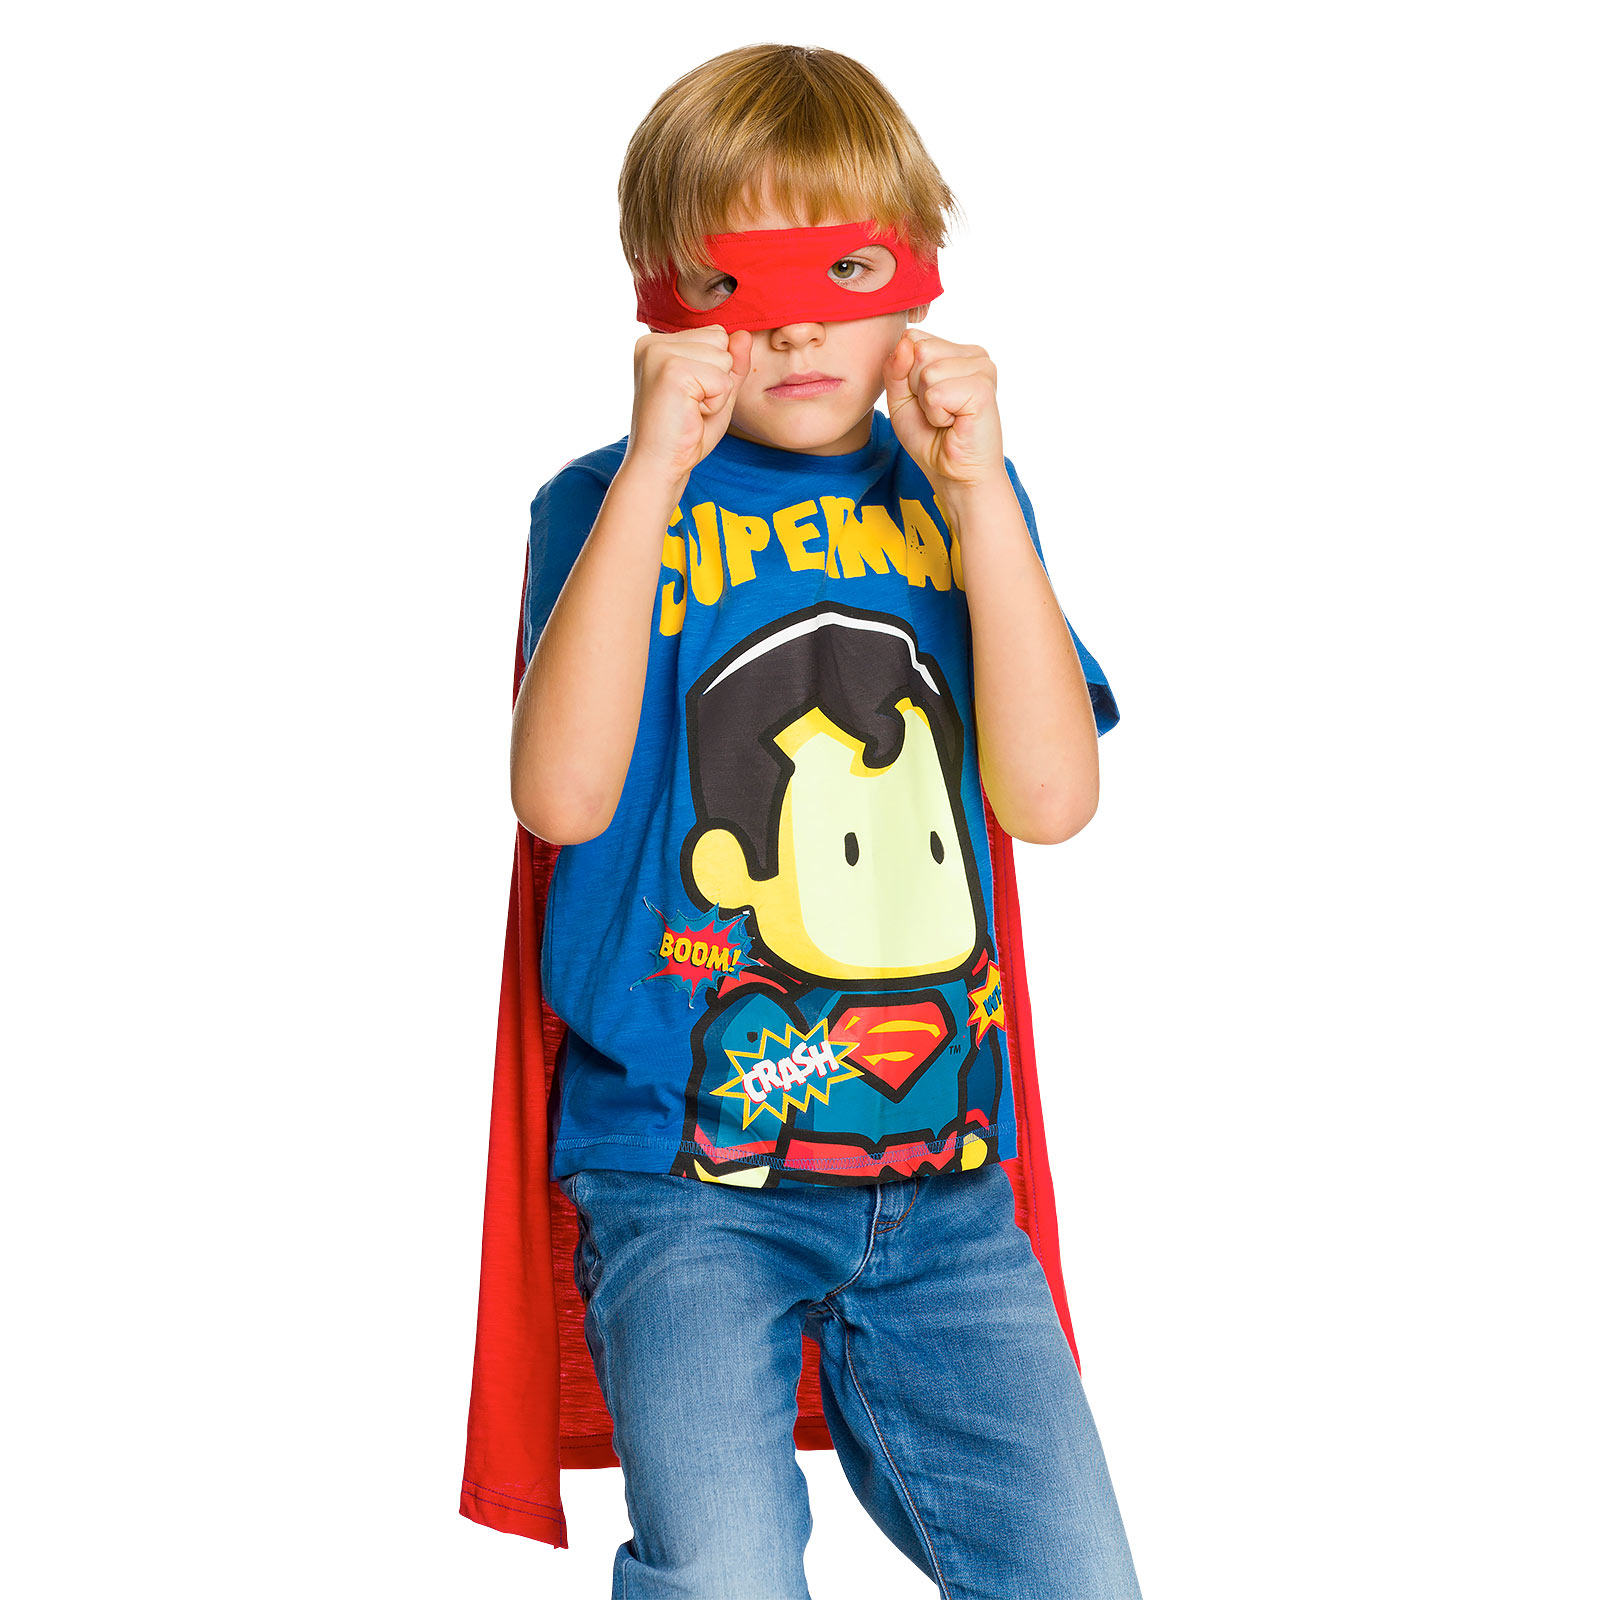 Superman - Children's T-Shirt with Cape & Eye Mask